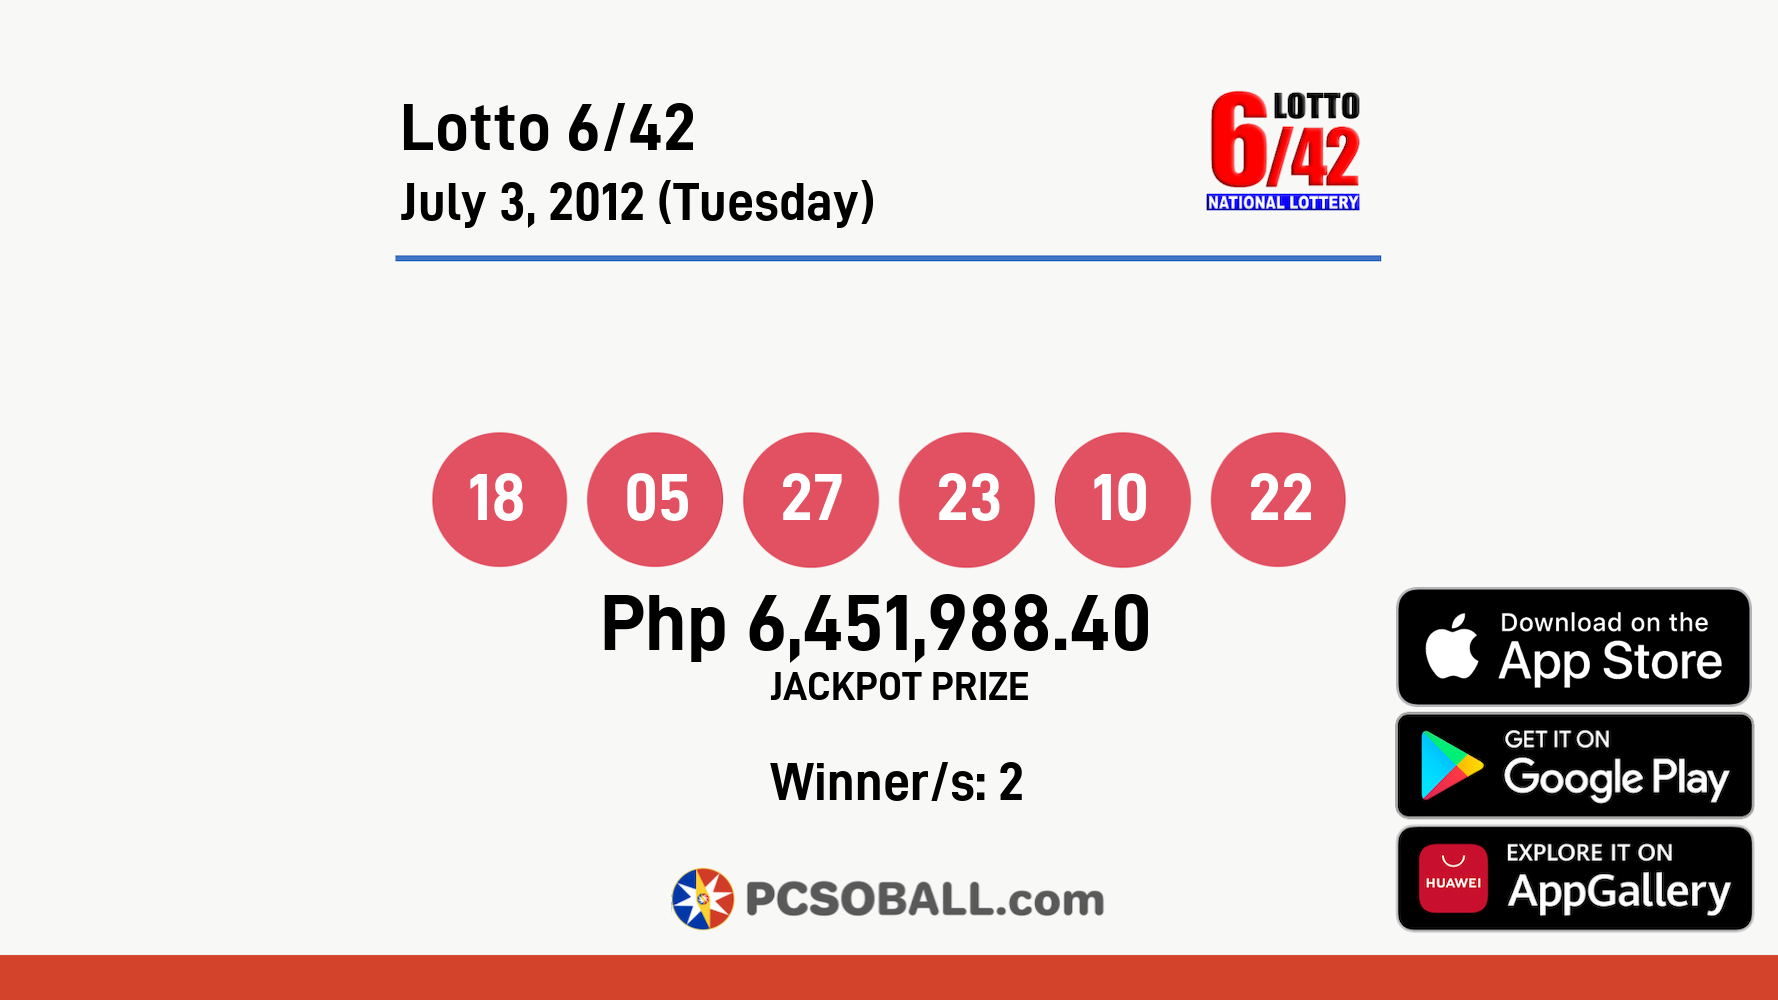 Lotto 6/42 July 3, 2012 (Tuesday) Result